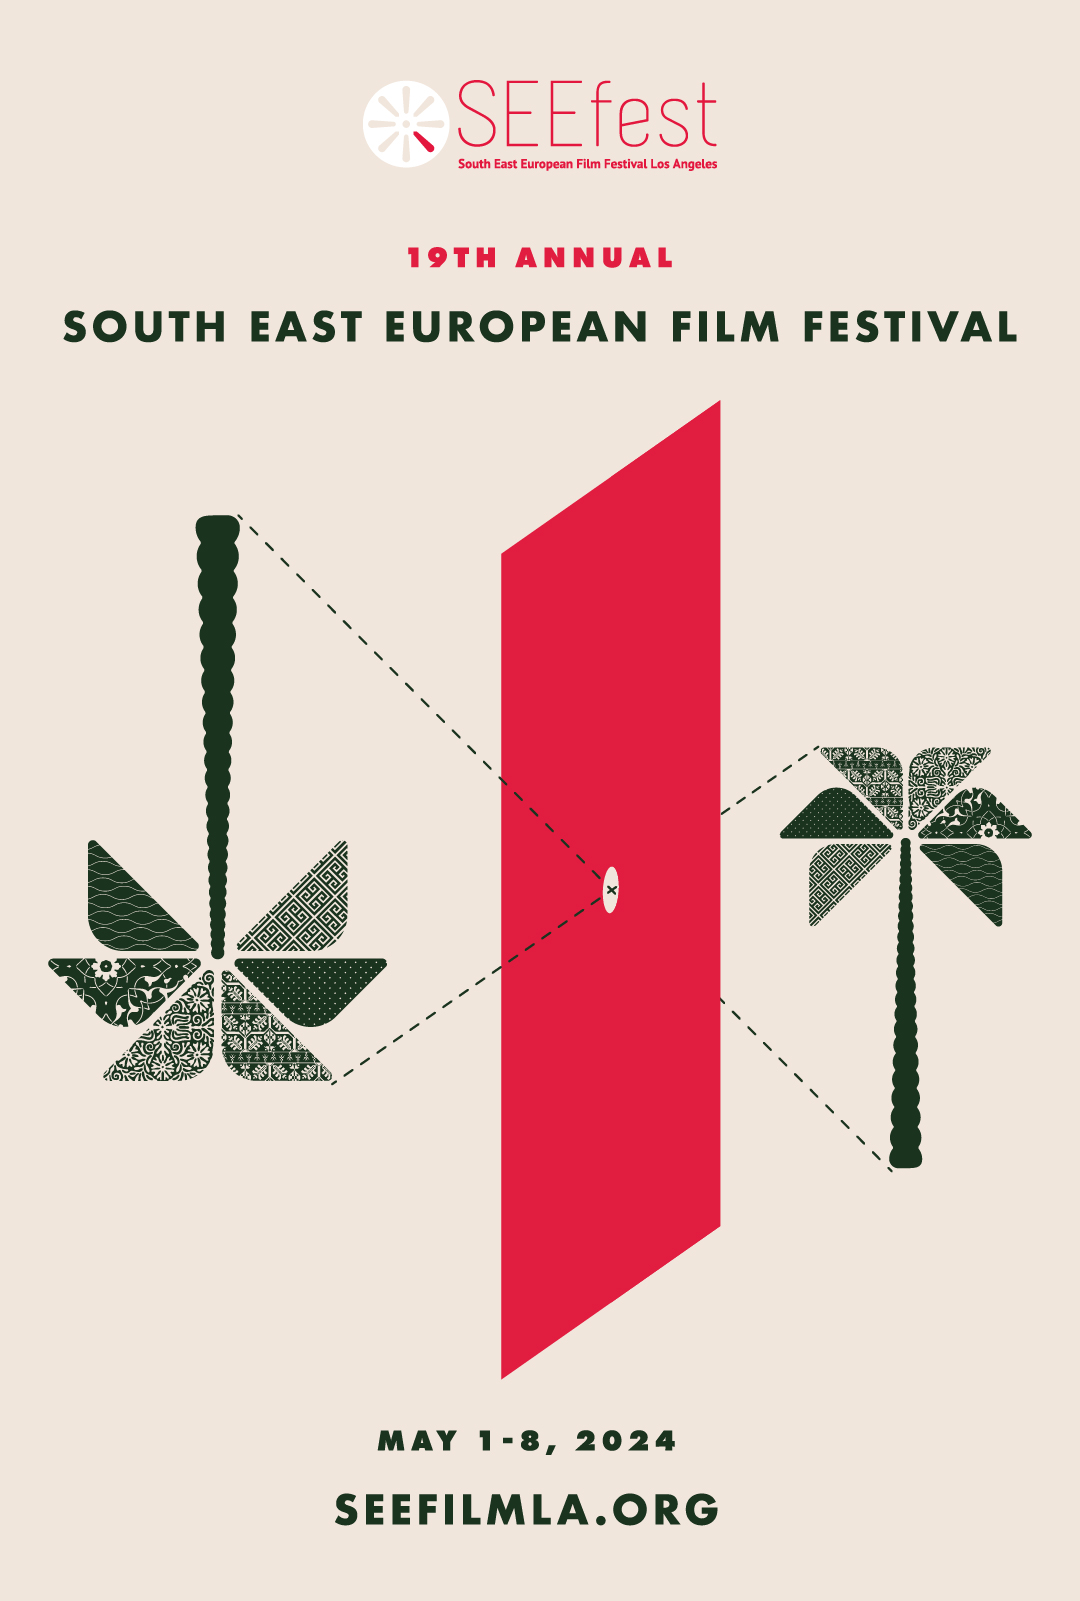 The image is a logo for the South East European Film Festival in Los Angeles. It features the text "SEEFest" along with details about the festival such as its 19th annual event happening from May 1-8, 2024. The design includes information about the festival and its website, seefilmla.org.